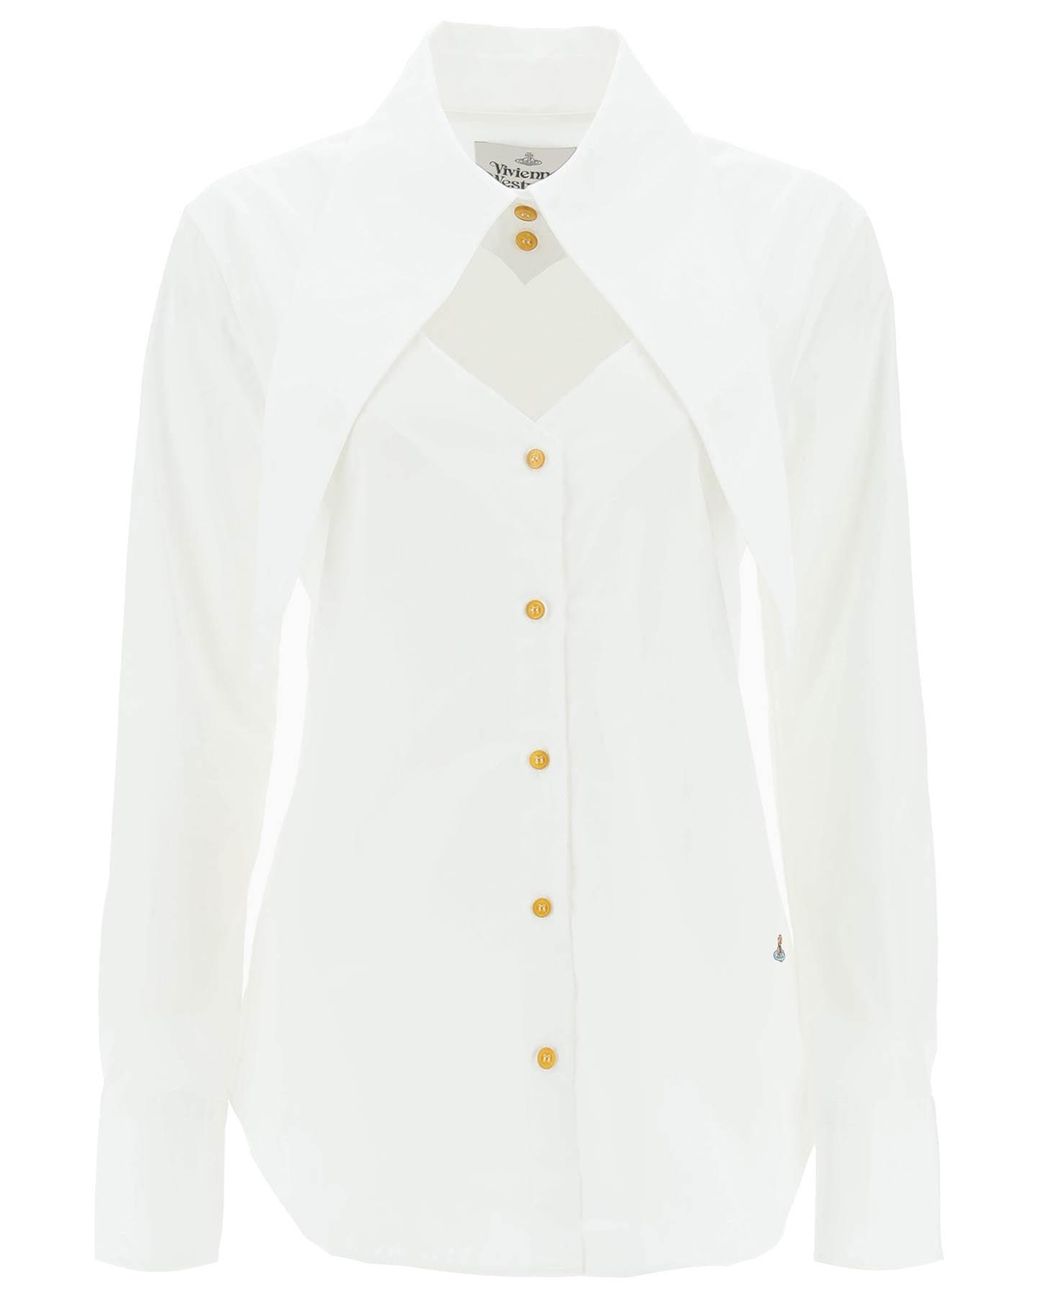 Vivienne Westwood Heart Shirt With Maxi Collar in White | Lyst